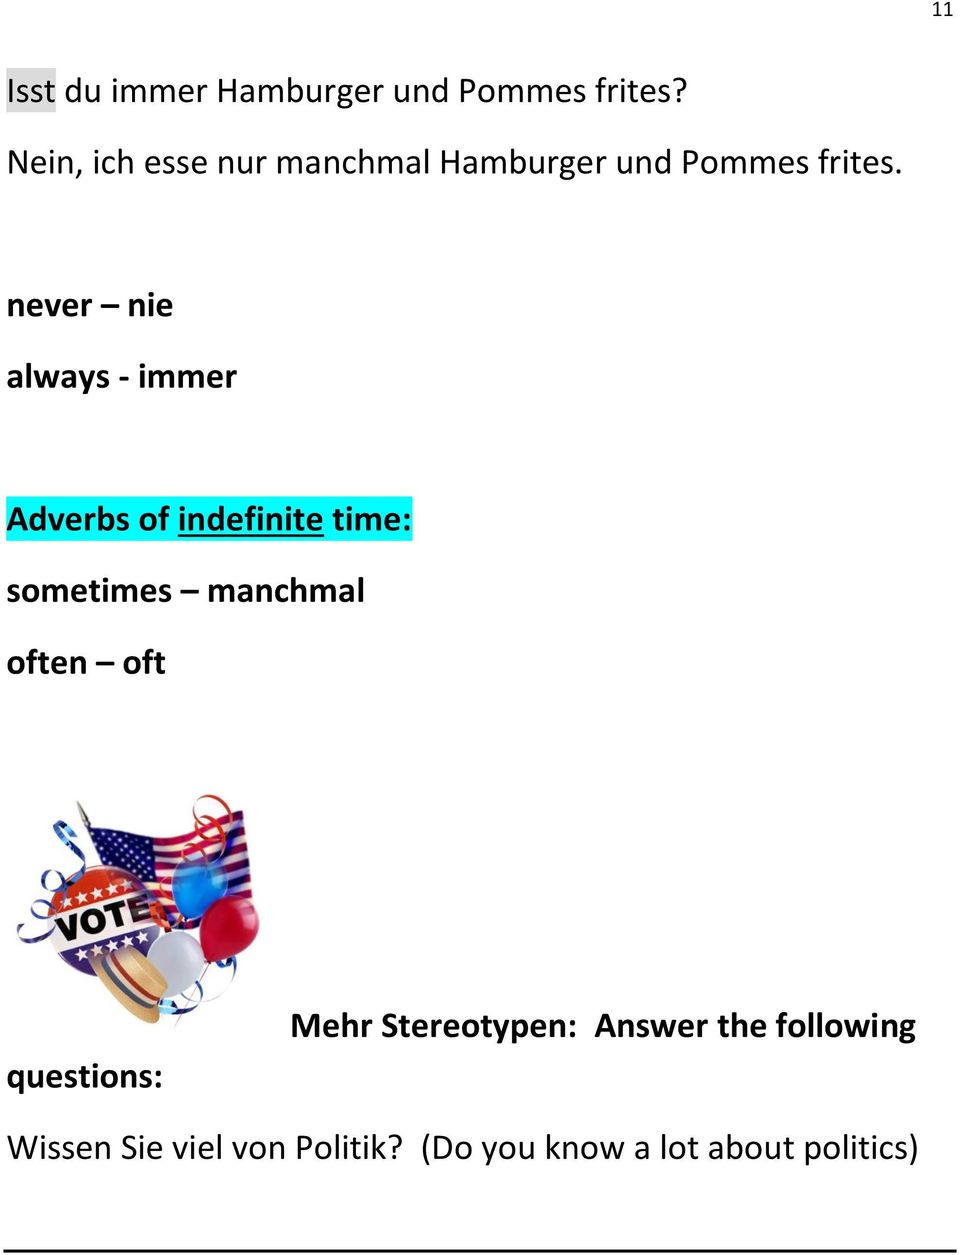 never nie always - immer Adverbs of indefinite time: sometimes manchmal